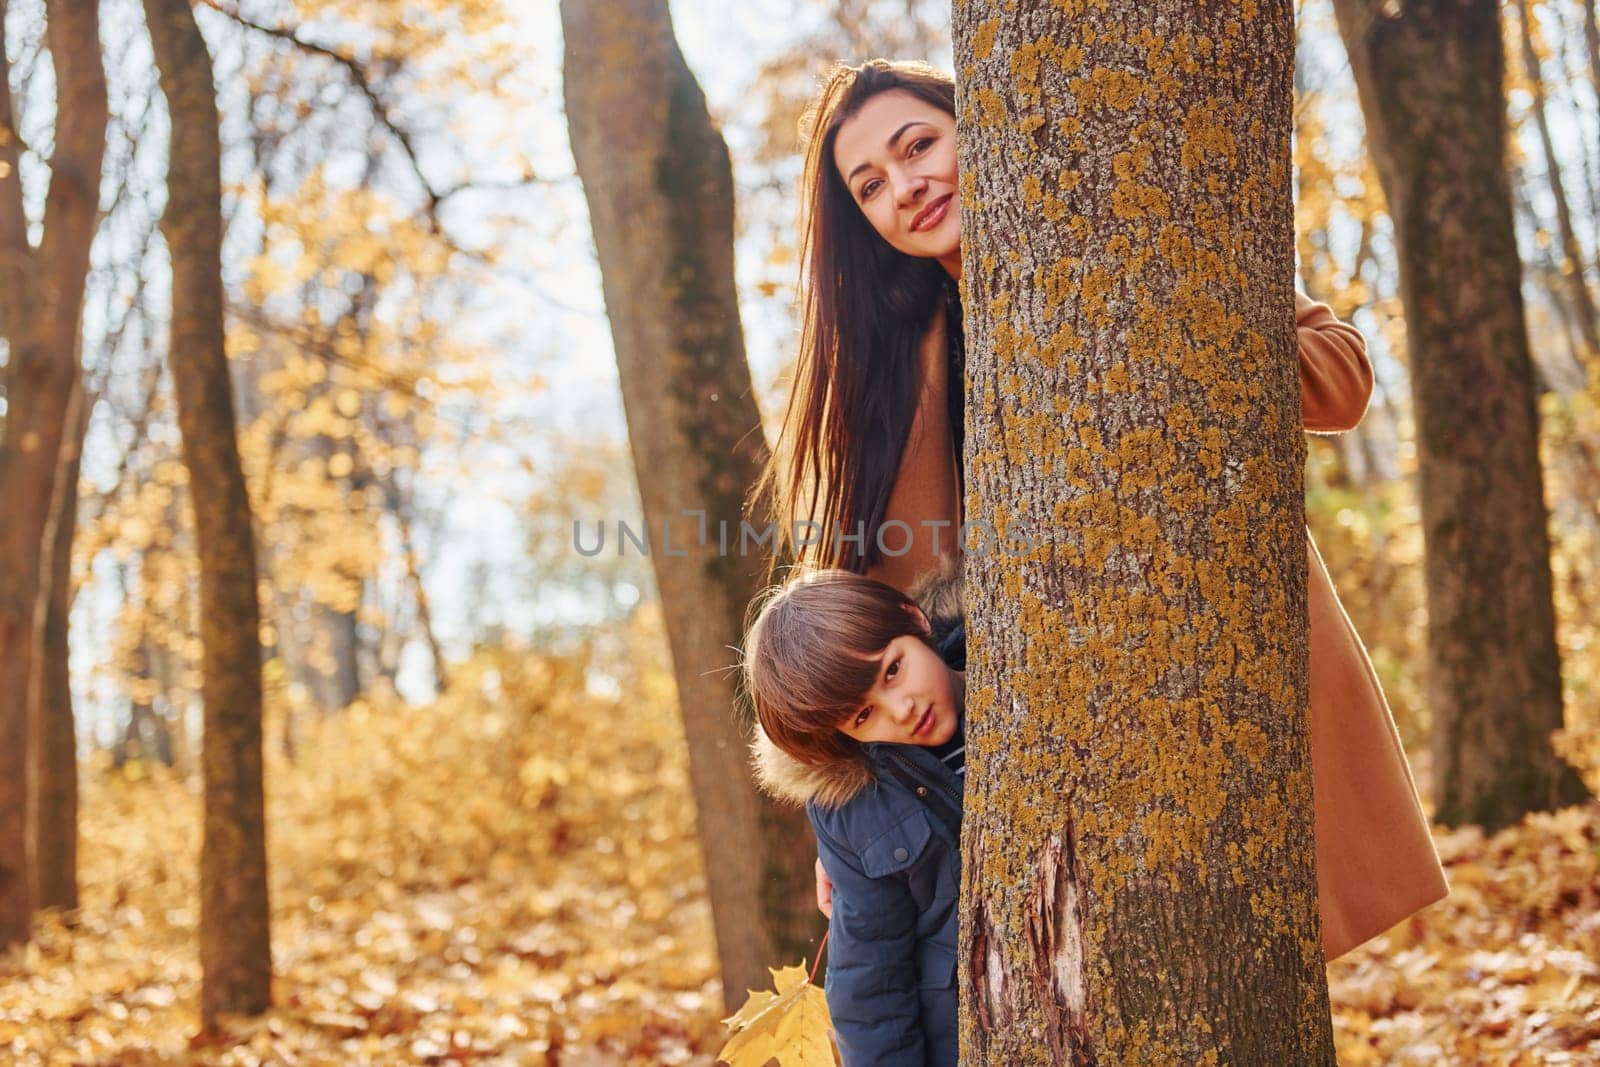 Cheerful woman and boy. Mother with her son is having fun outdoors in the autumn forest.